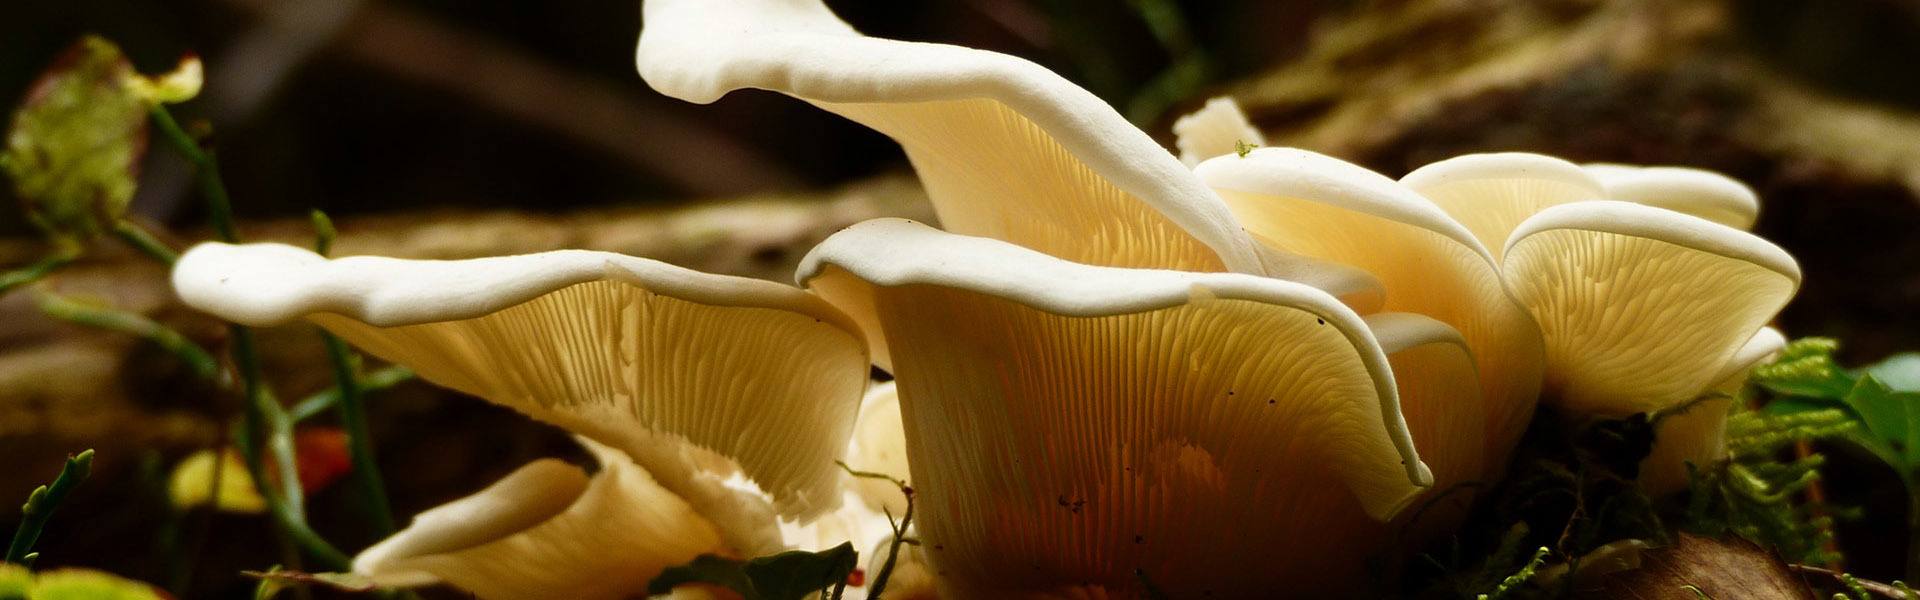 Oyster Mushrooms 101 A Complete Guide To Oyster Mushrooms Header